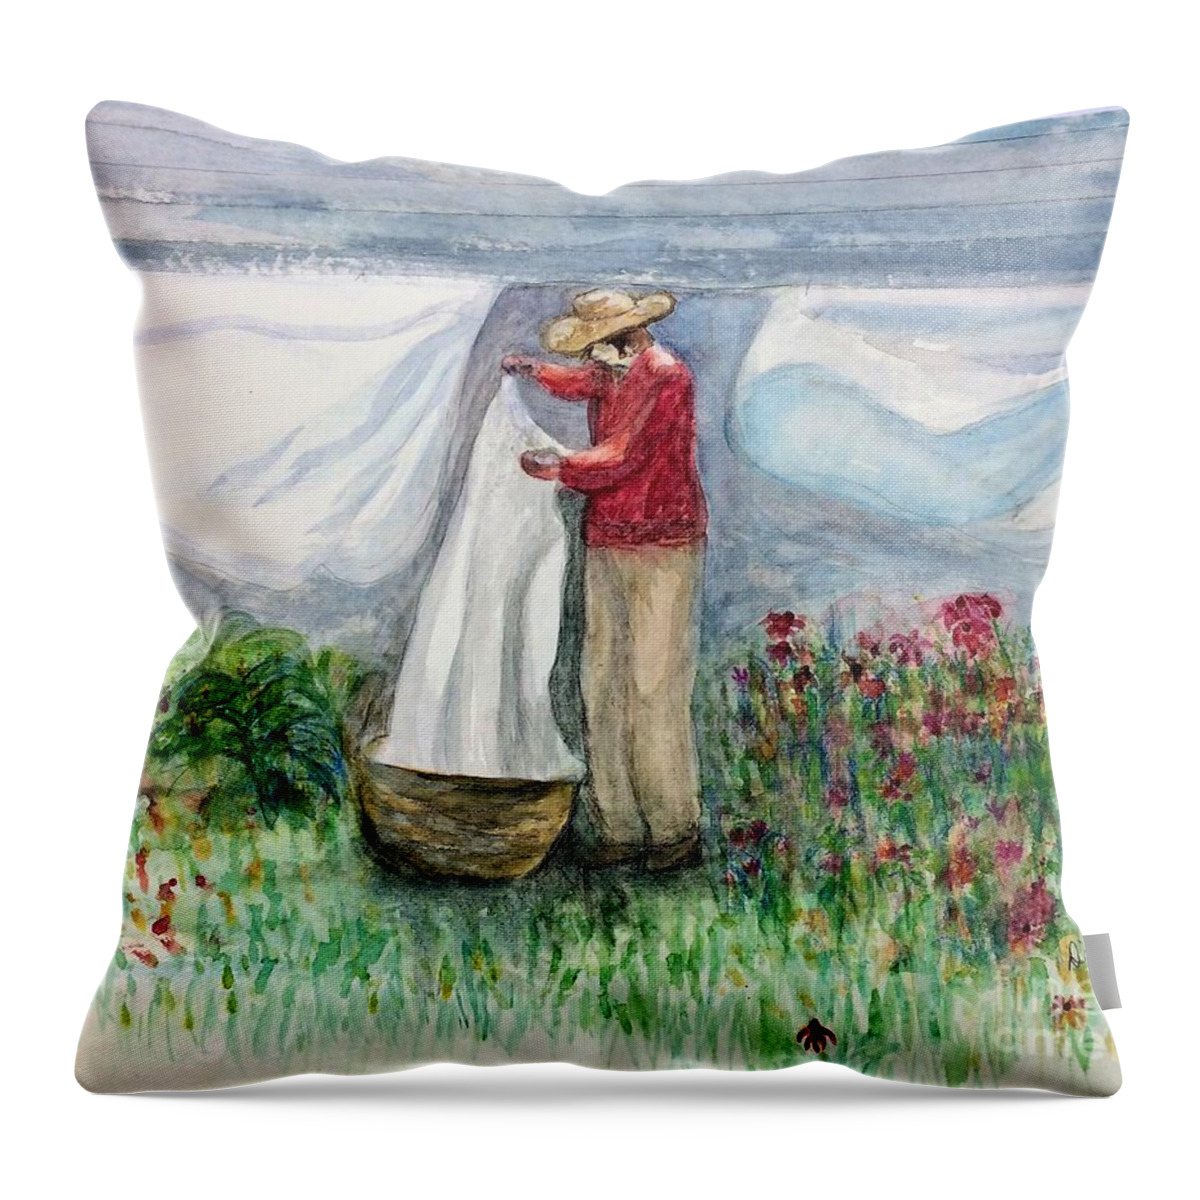 Laundry Hanging On The Line Throw Pillow featuring the painting Jo's Linens by Deb Stroh-Larson